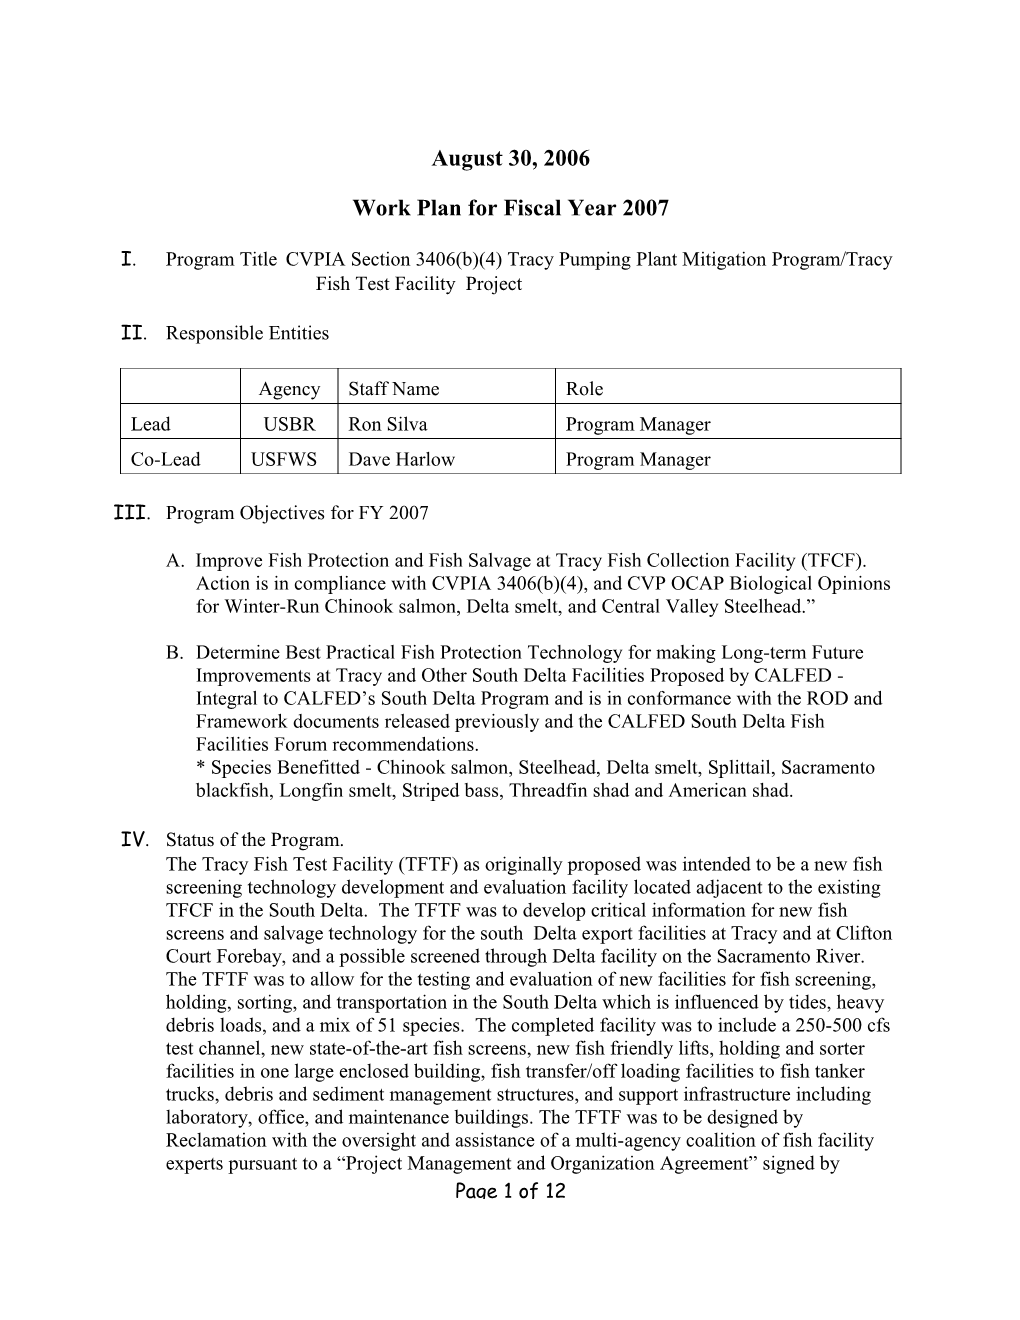 Work Plan for Fiscal Year 2003